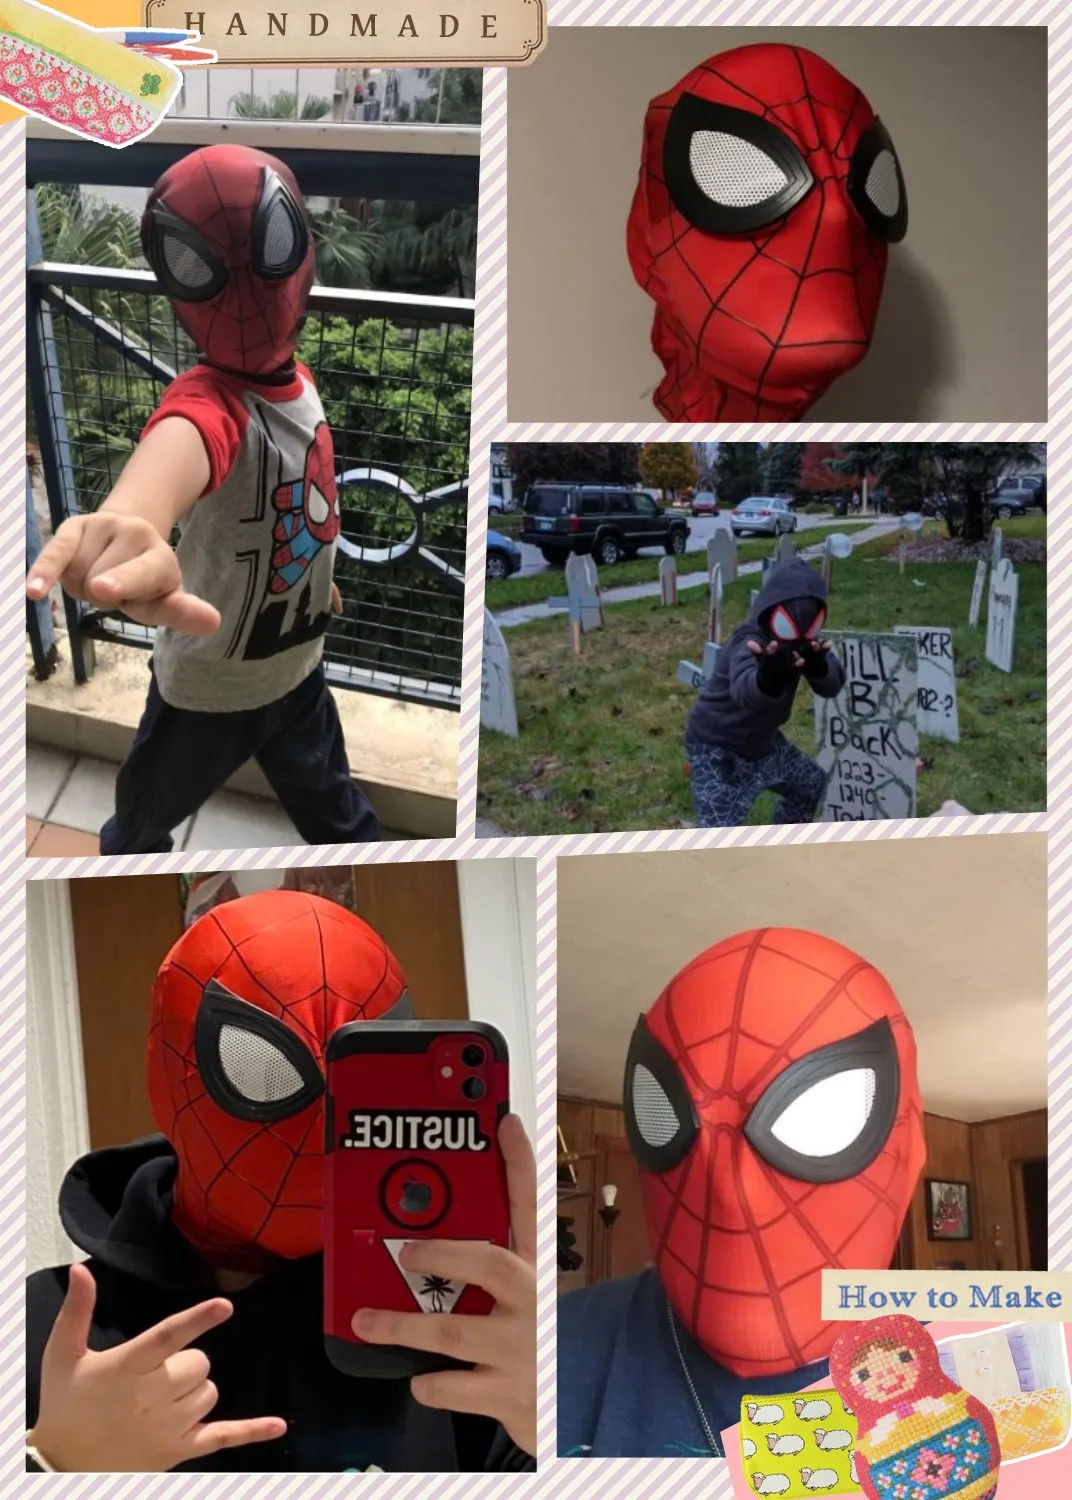 Halloween Kids Spiderman Costume With Fabric Mask Marvel Avengers: Endgame  Child's Iron Spider Superhero Children Day Halloween Fancy Dress Costume  (Large), Hobbies Toys, Toys Games On Carousell | Amazon Hot Sell Christmas